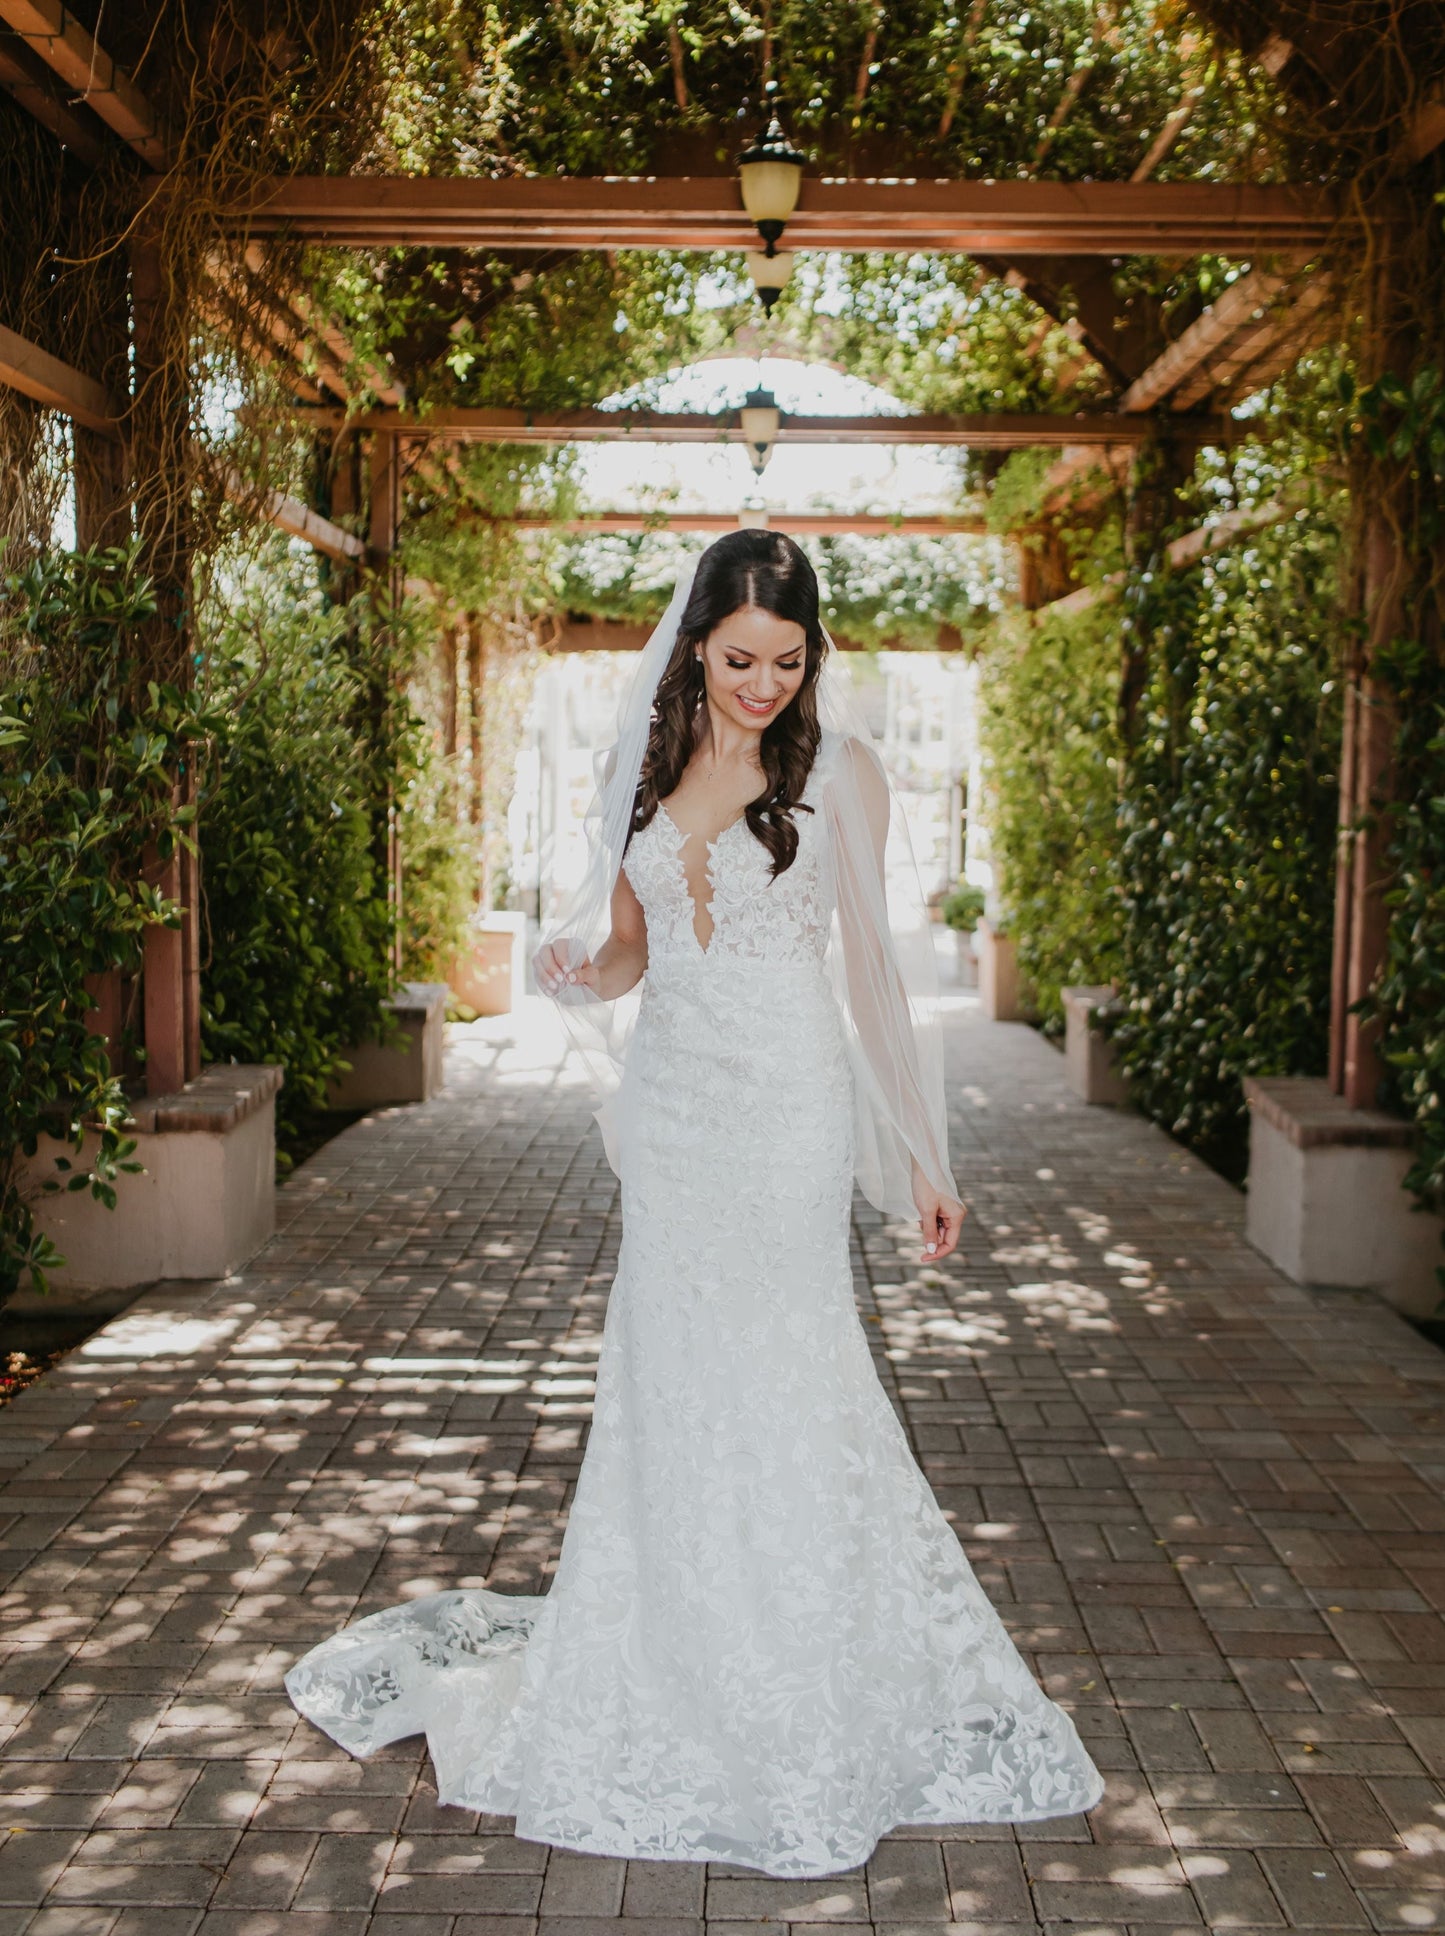 Napa Winery Bridal Inspiration: Lace Dress and Simple Veil by One Blushing Bride